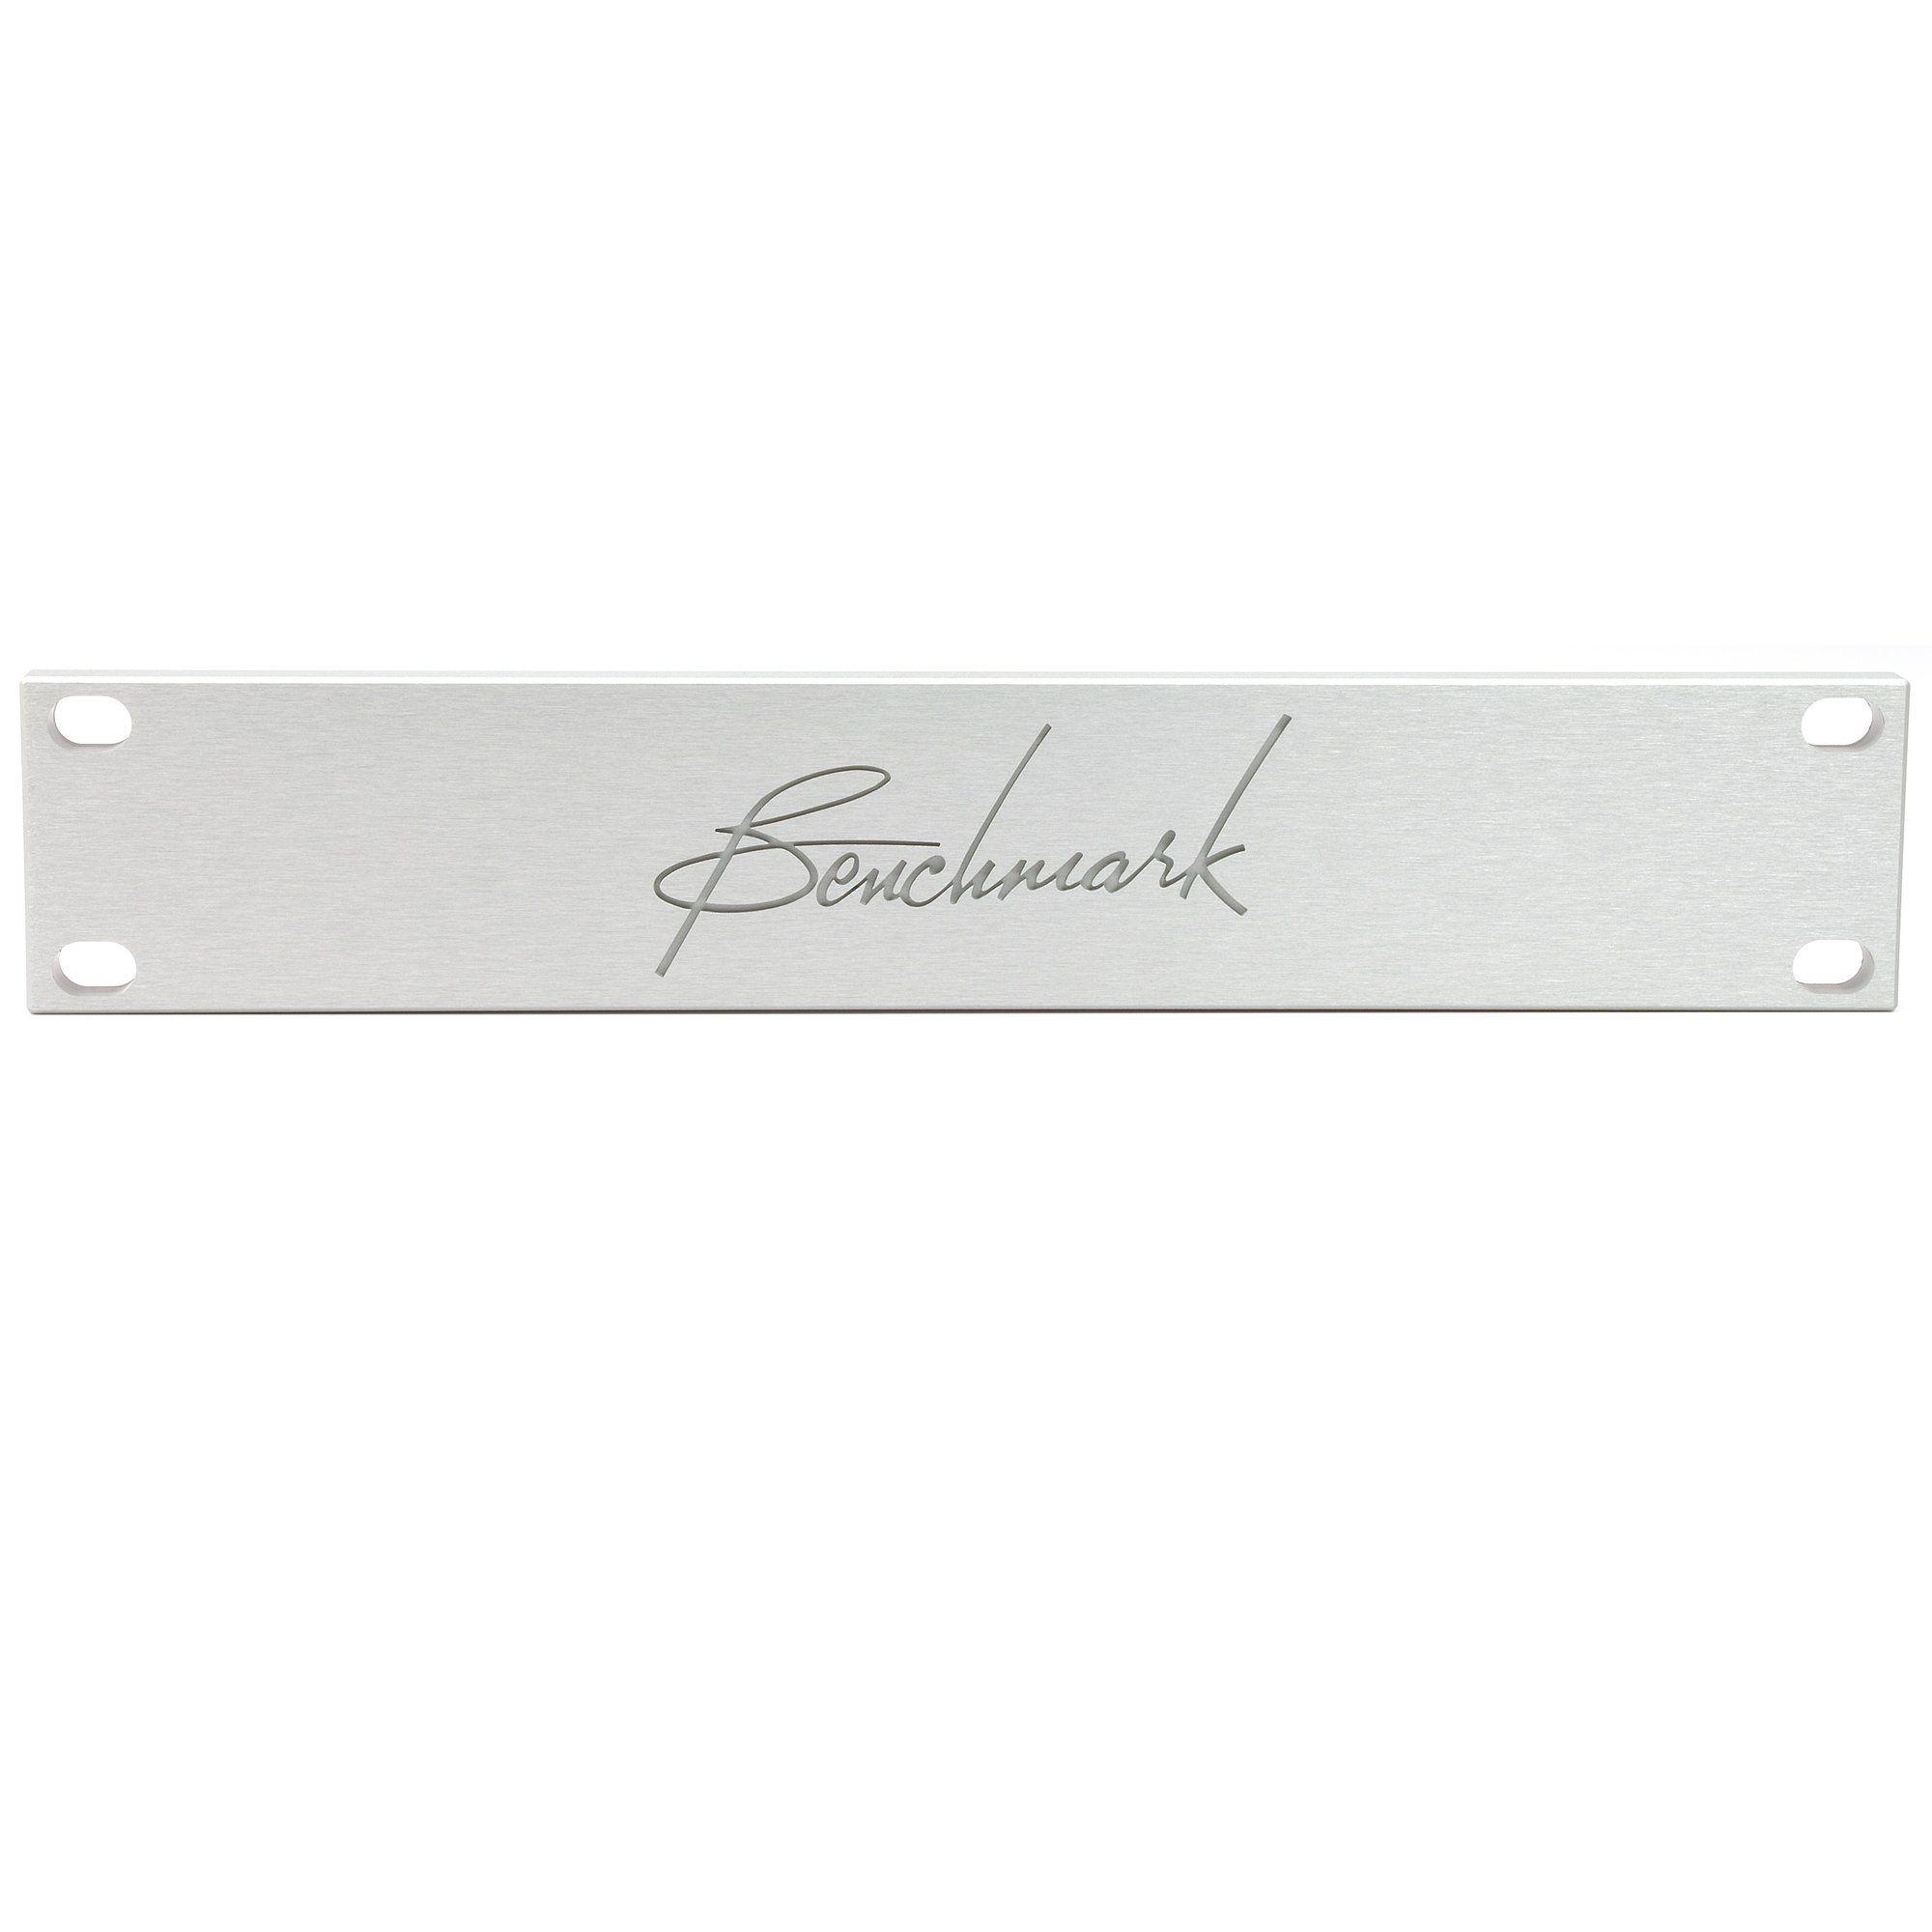 Benchmark Logo - Benchmark 1/2-wide Blank Plate - Silver with Logo